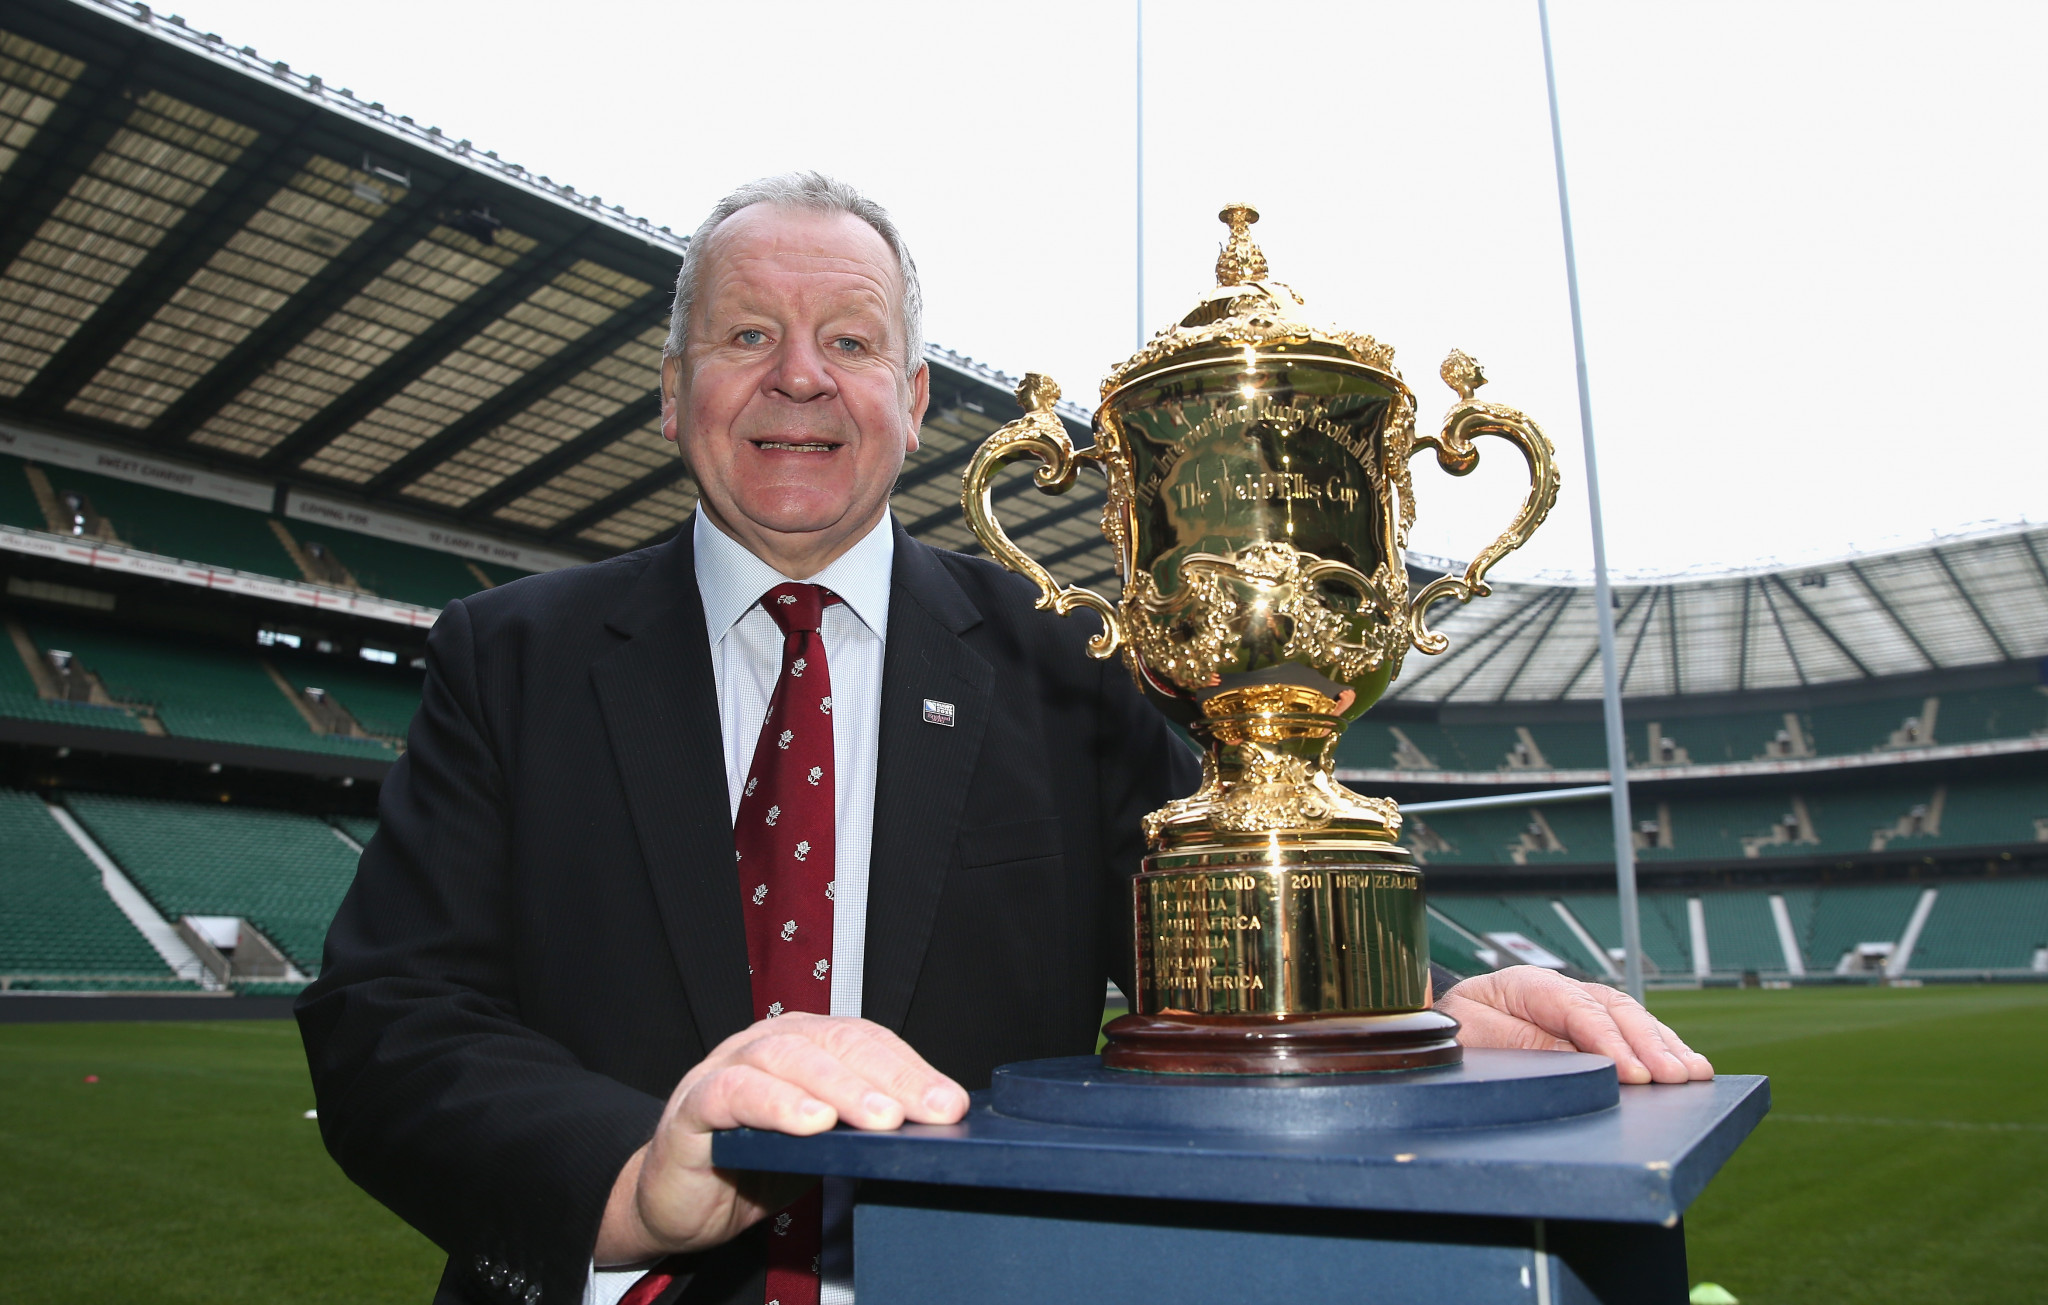 Rugby World chairman Bill Beaumont is also head of Rugby World Cup Limited, who have recommended South Africa be awarded the 2023 World Cup ©Getty Images